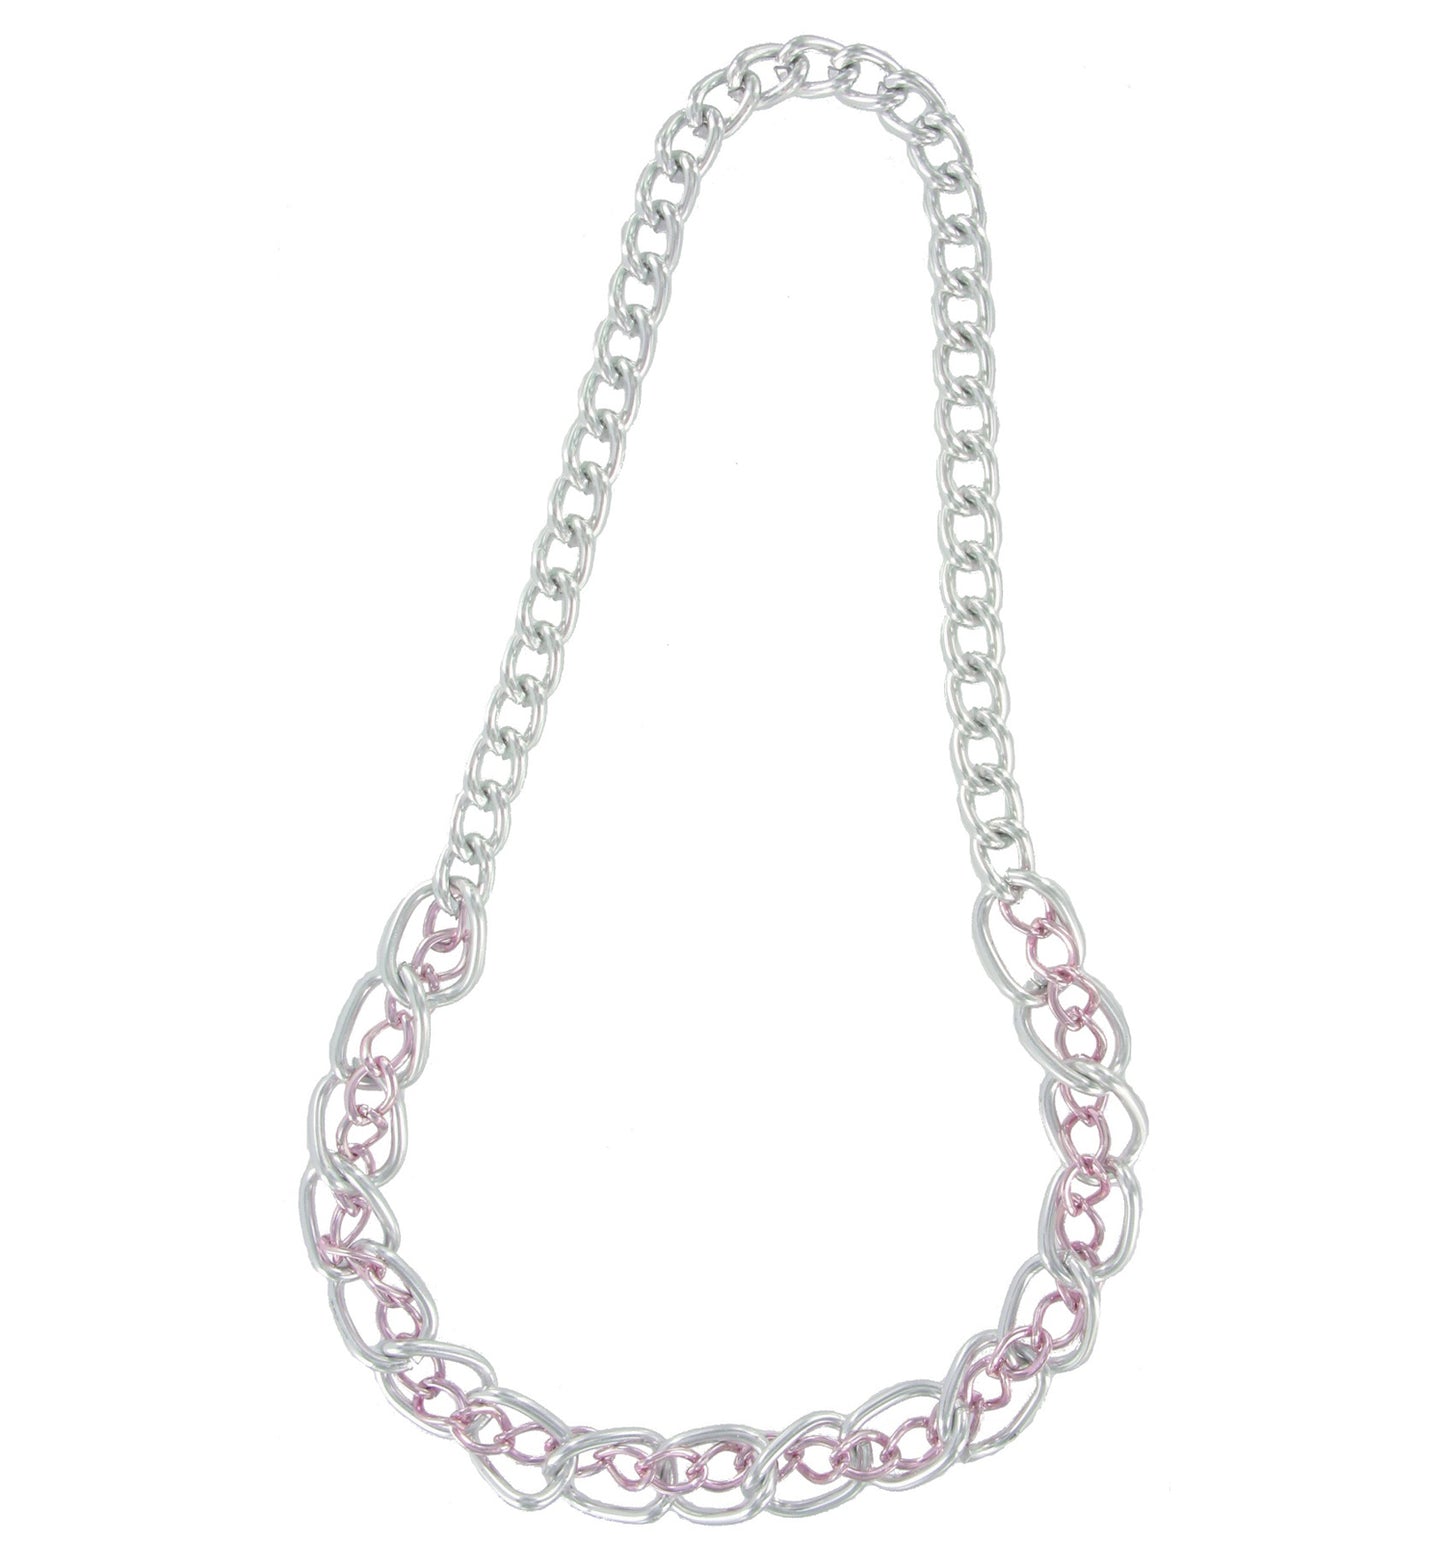 Silver Tone Pink Chunky Chain Link Statement Necklace 24"